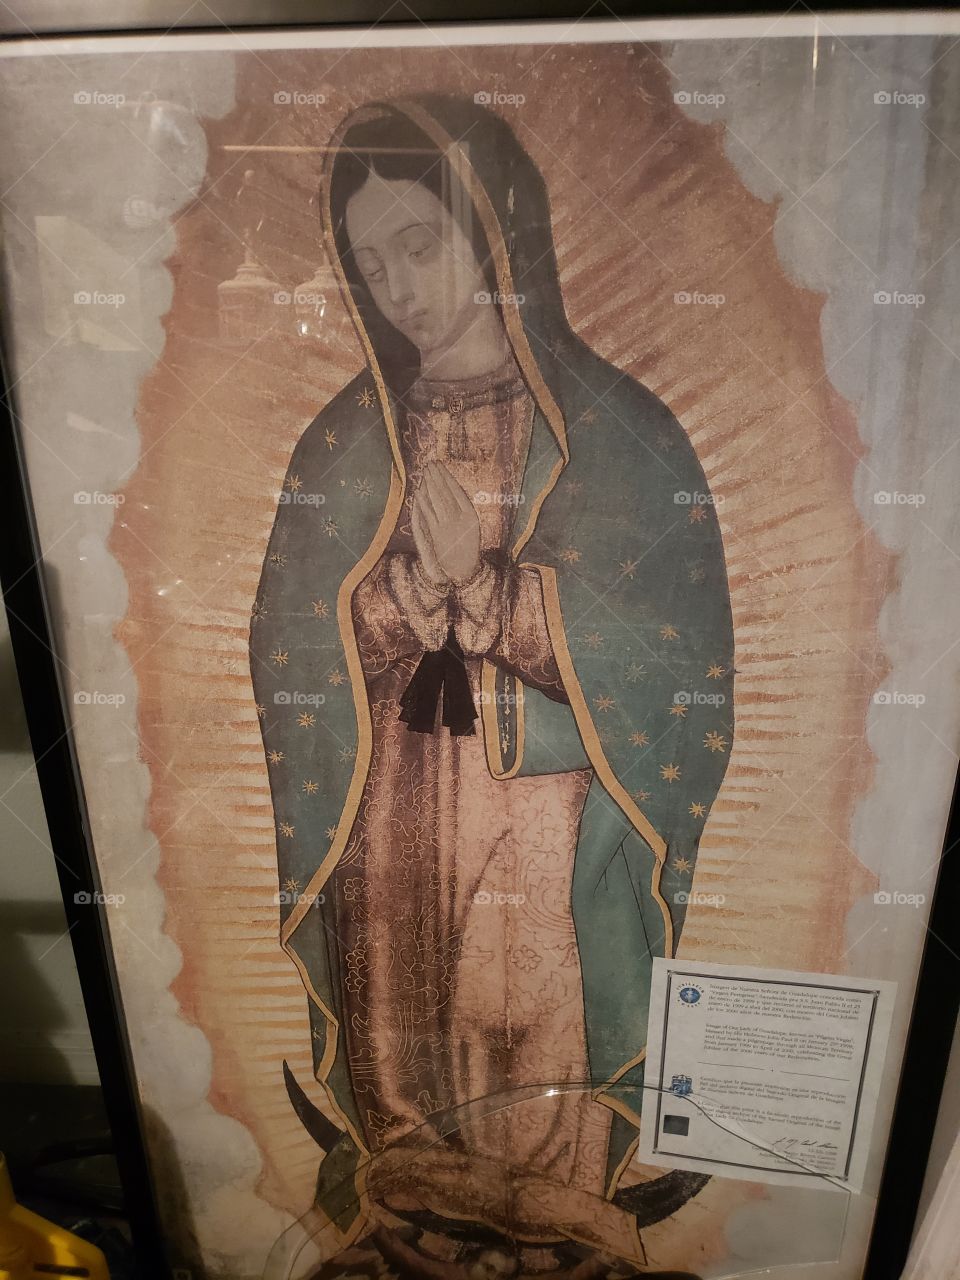 Virge de Guadalupe Mexicana